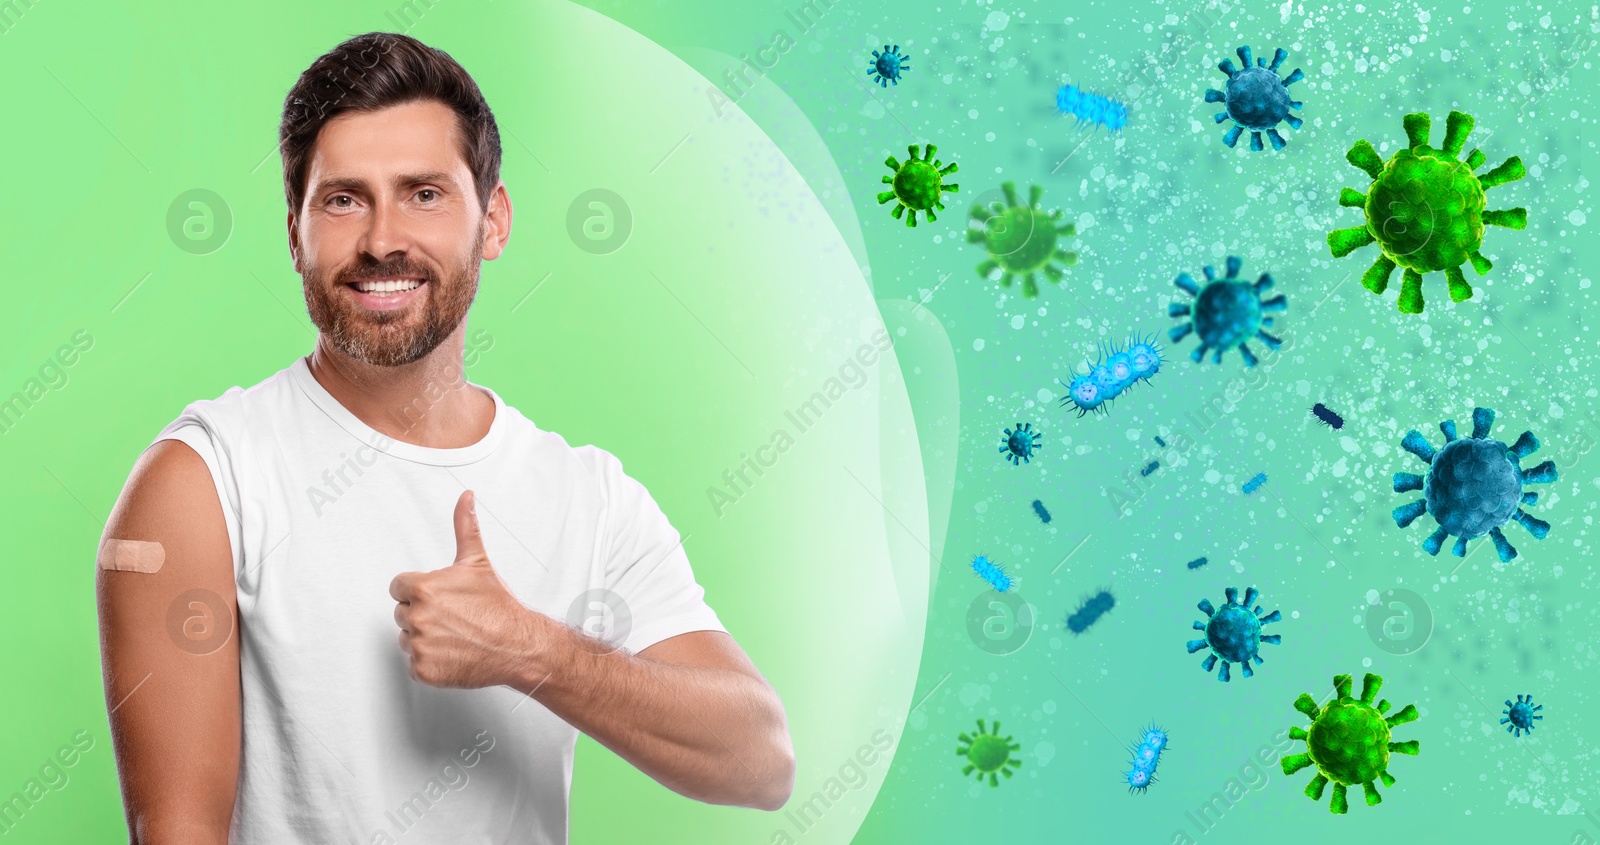 Image of Man with strong immunity due to vaccination surrounded by viruses on green background, banner design